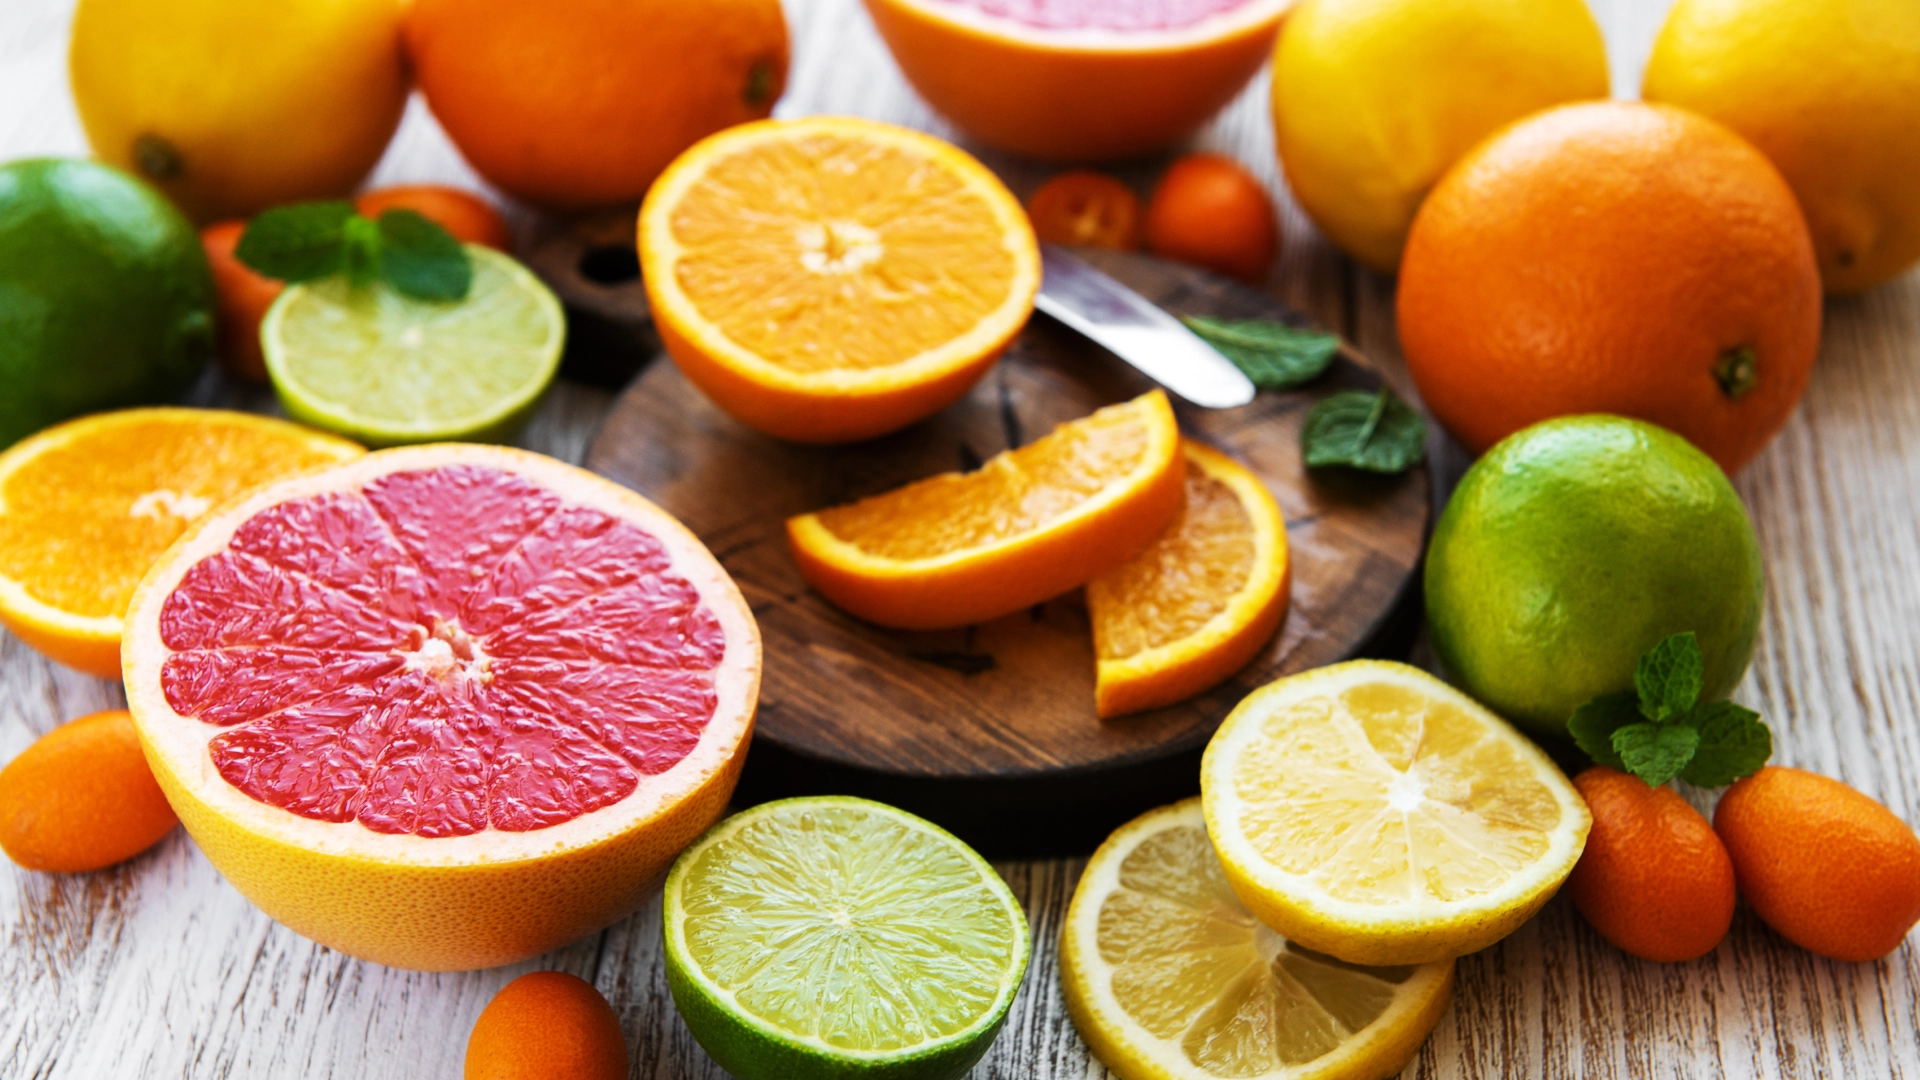 A colourful array of freshly sliced citrus fruits arranged on a wooden surface, best foods to improve immunity